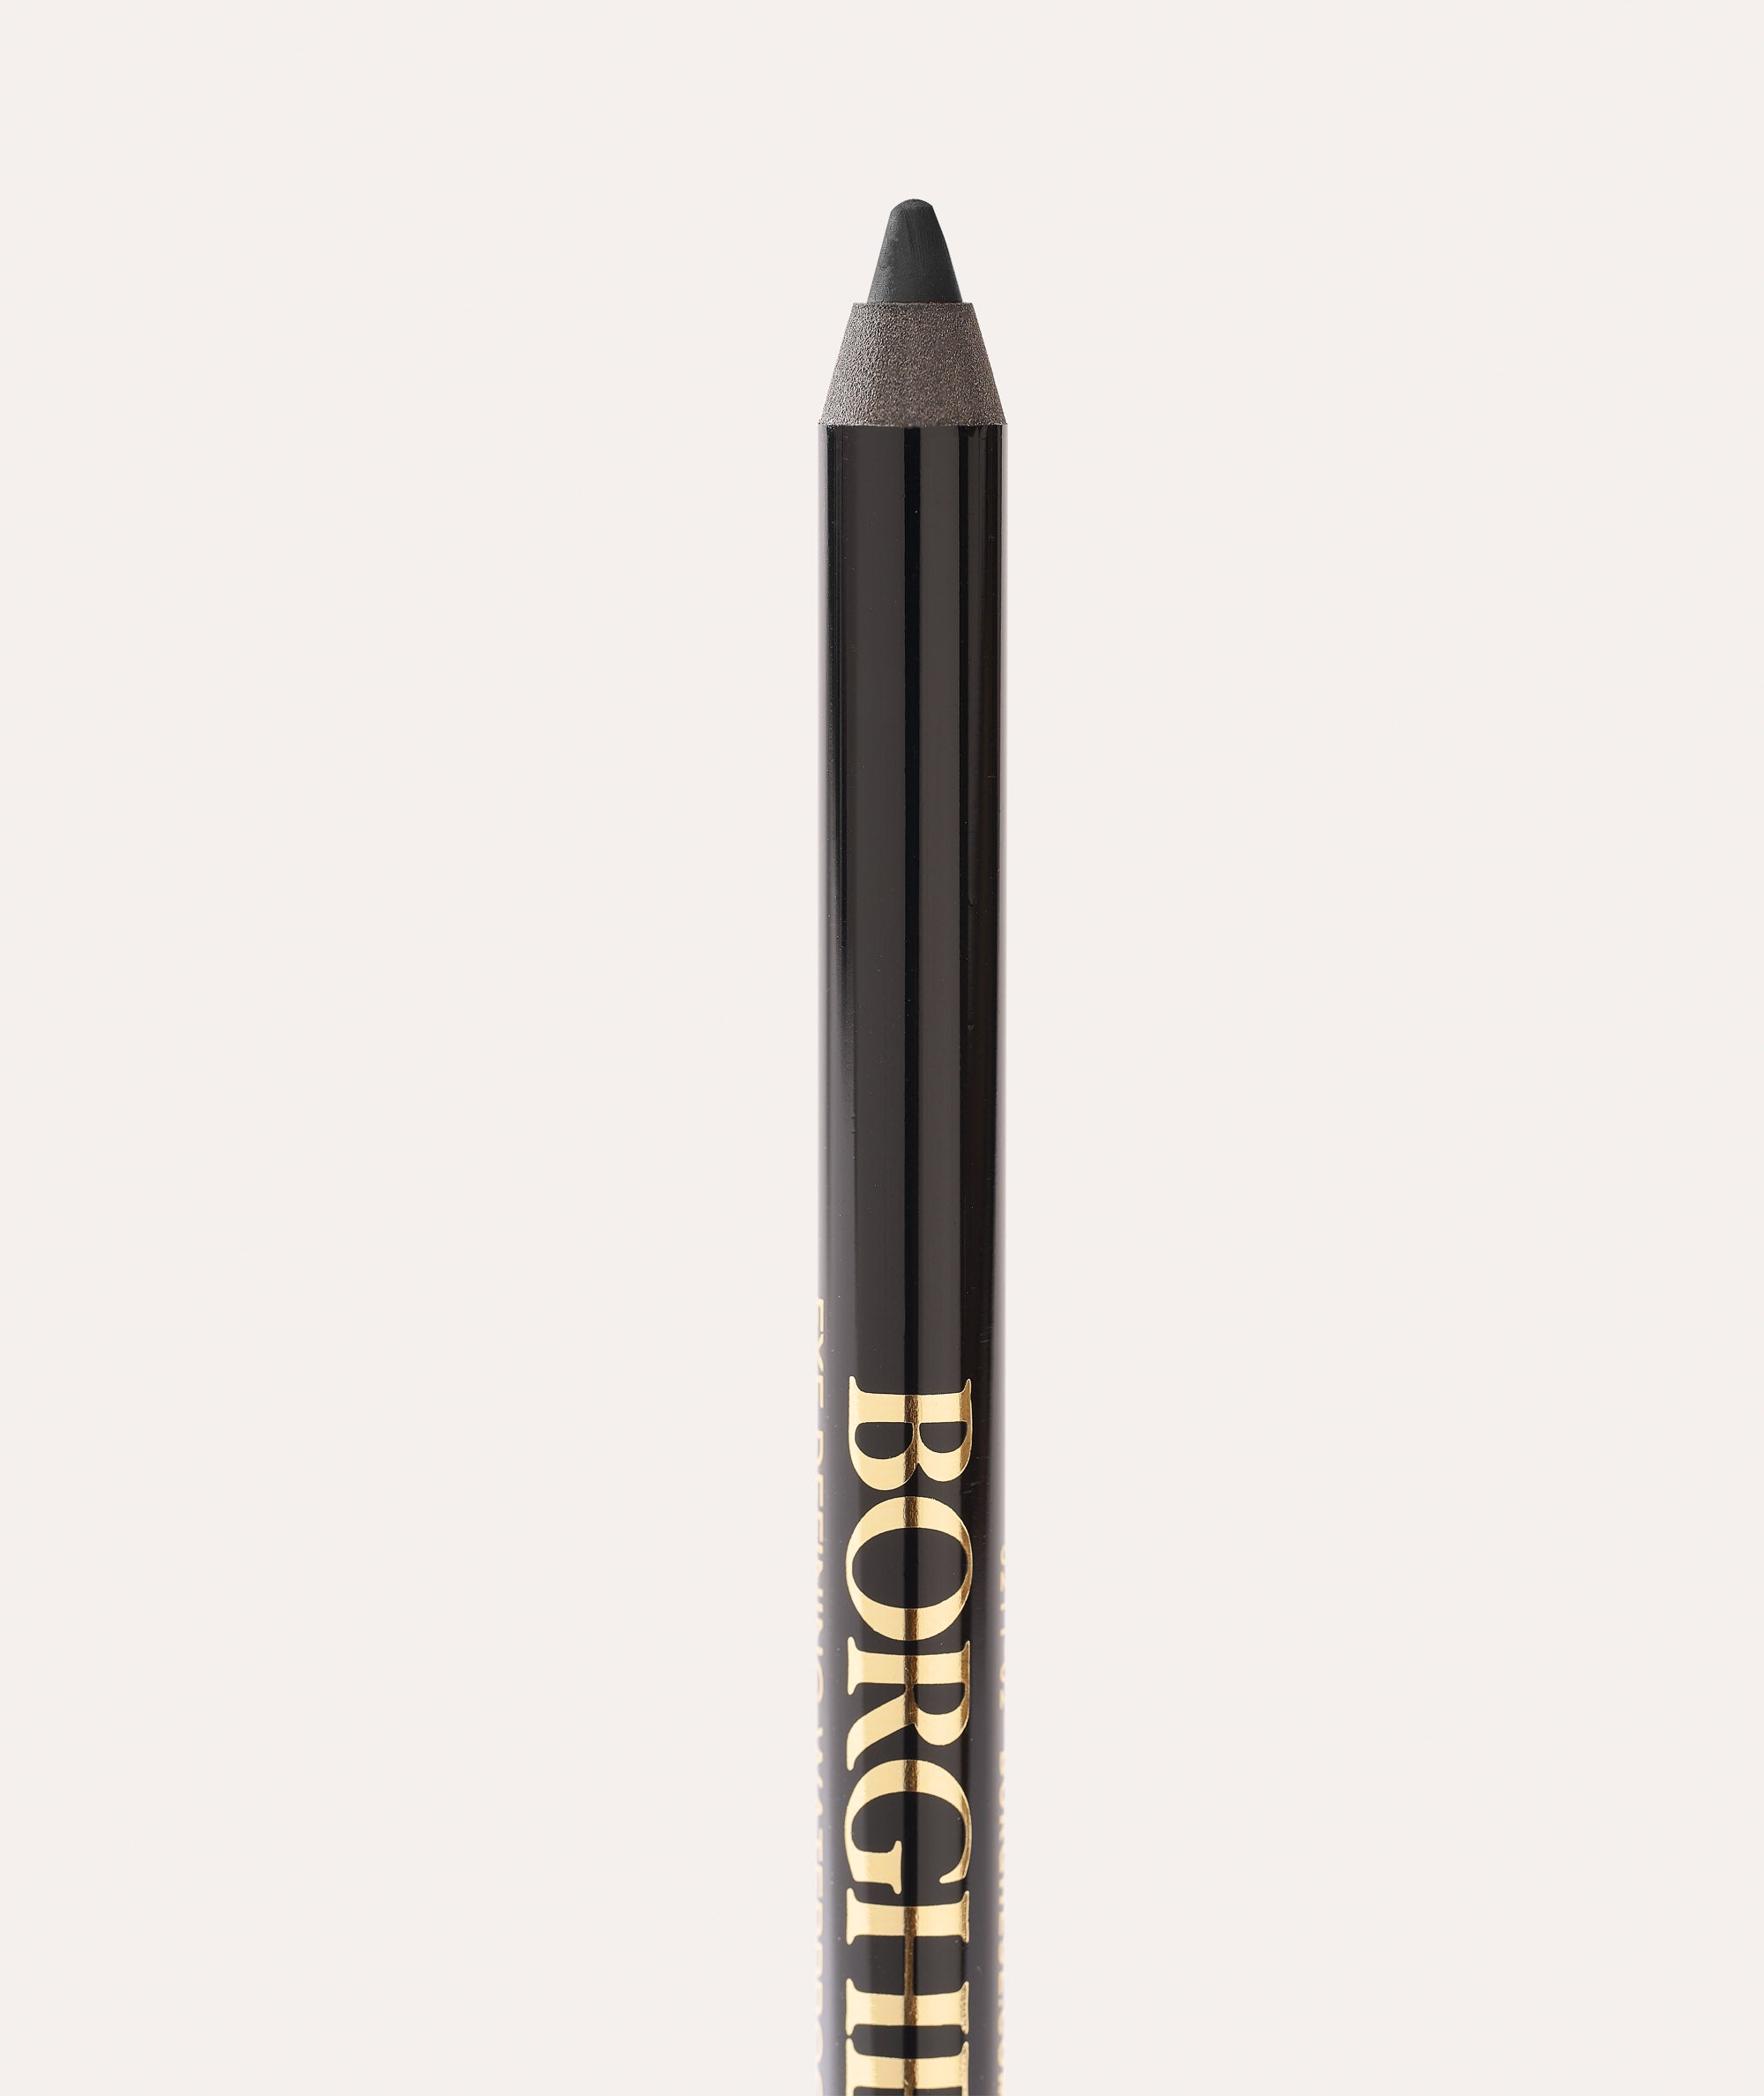 This is a picture of Borghese Eye Defining Waterproof Pencil in black